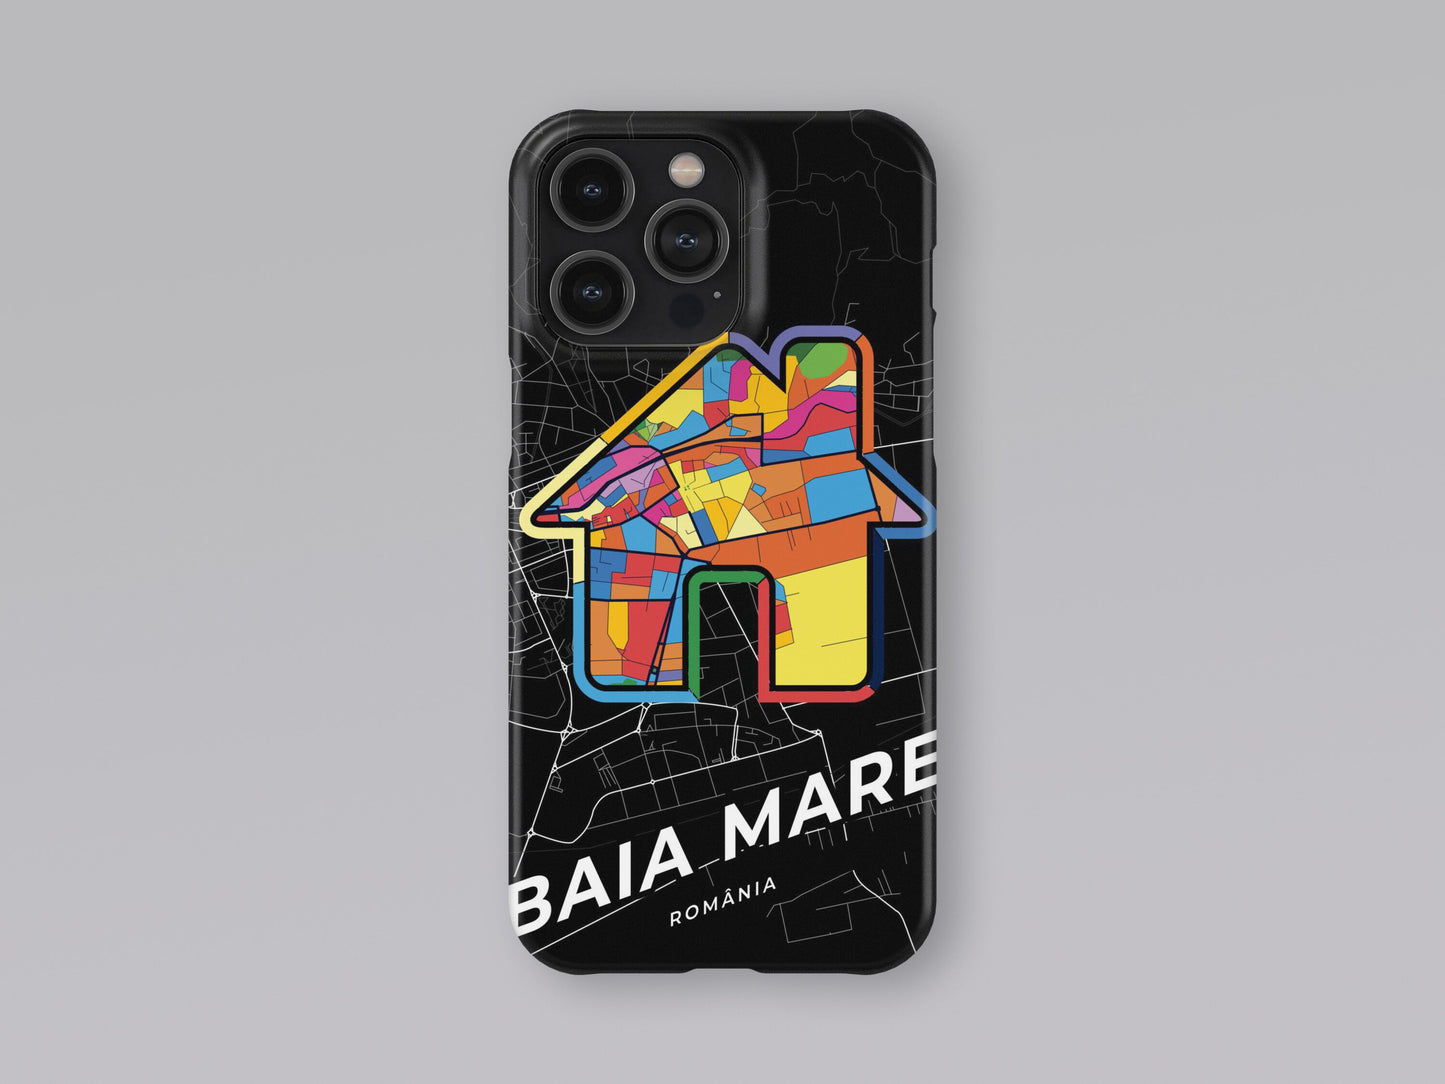 Baia Mare Romania slim phone case with colorful icon. Birthday, wedding or housewarming gift. Couple match cases. 3